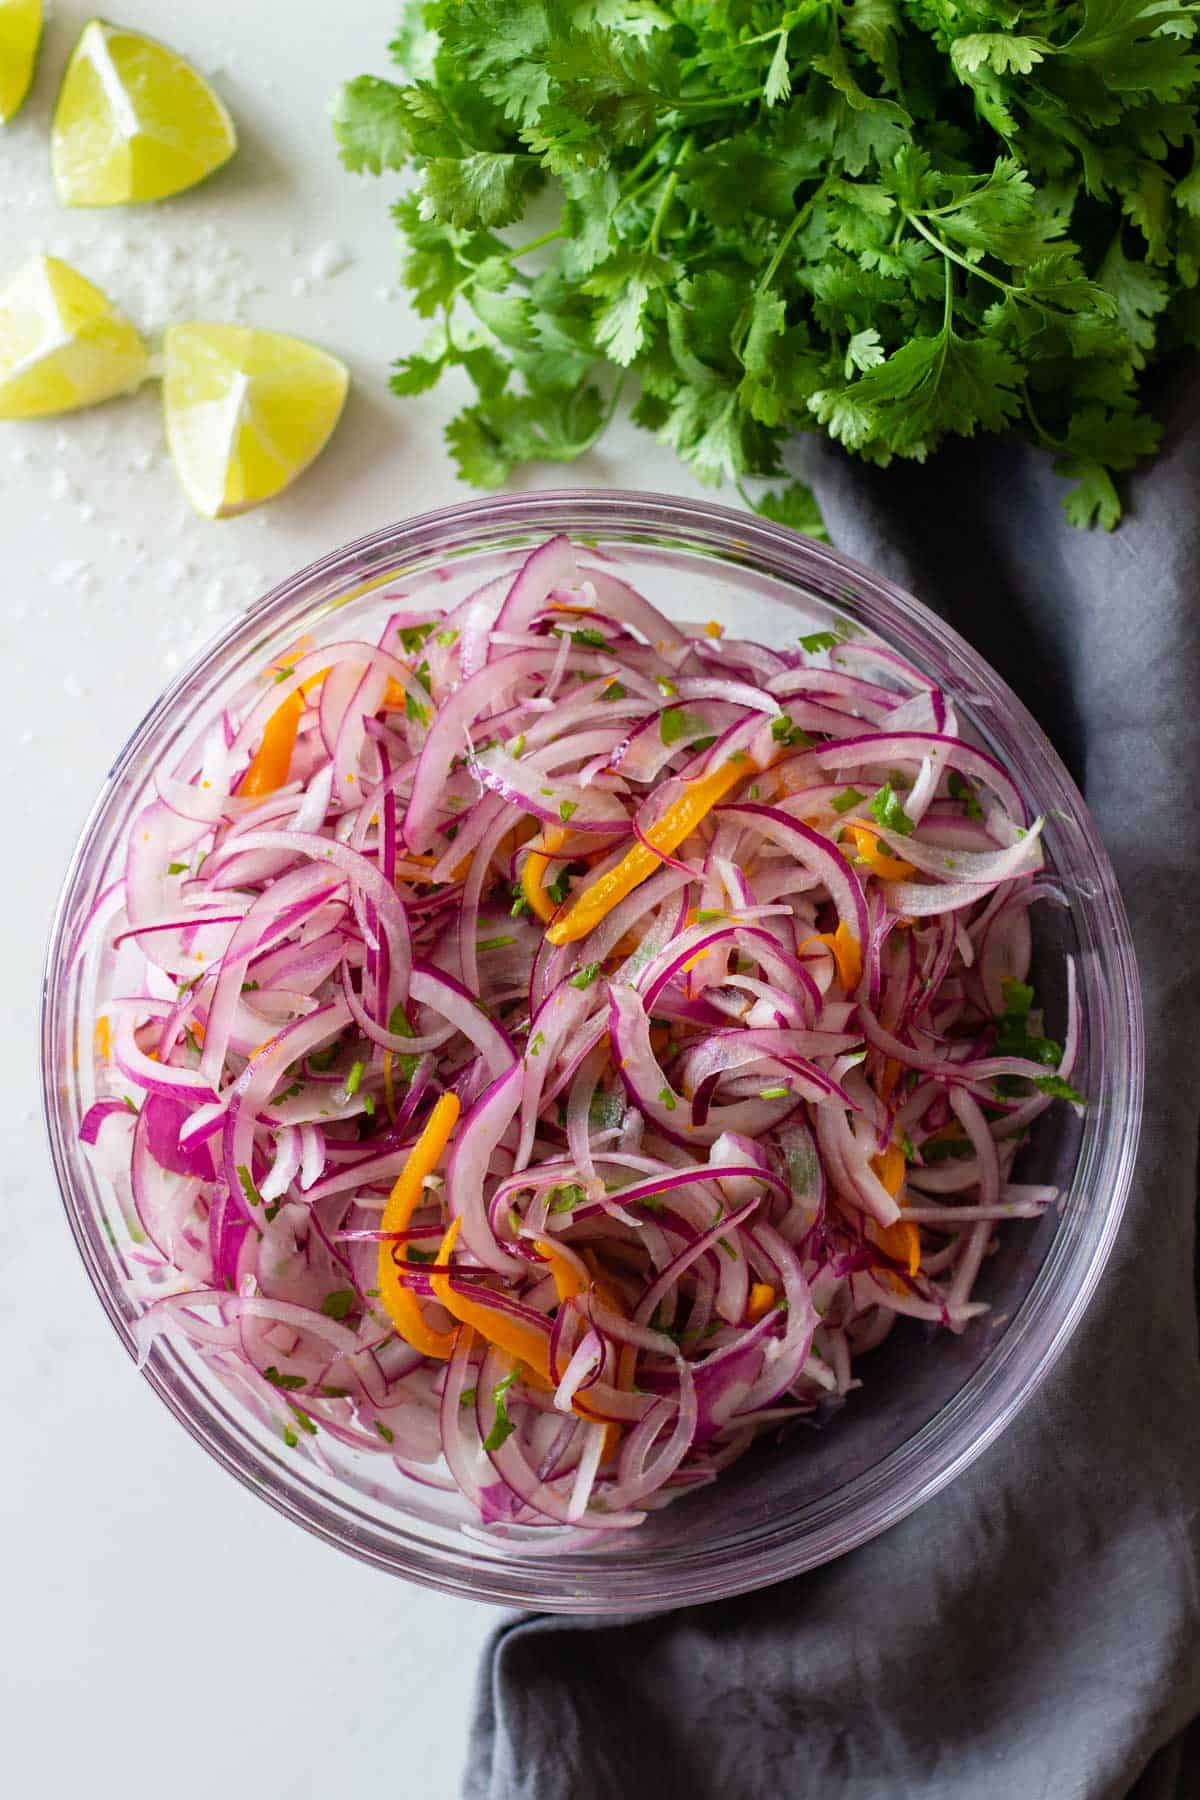 sliced red onion, aji amarillo pepper and cilantro (a.k.a. as salsa criolla) in a mixing bowl.